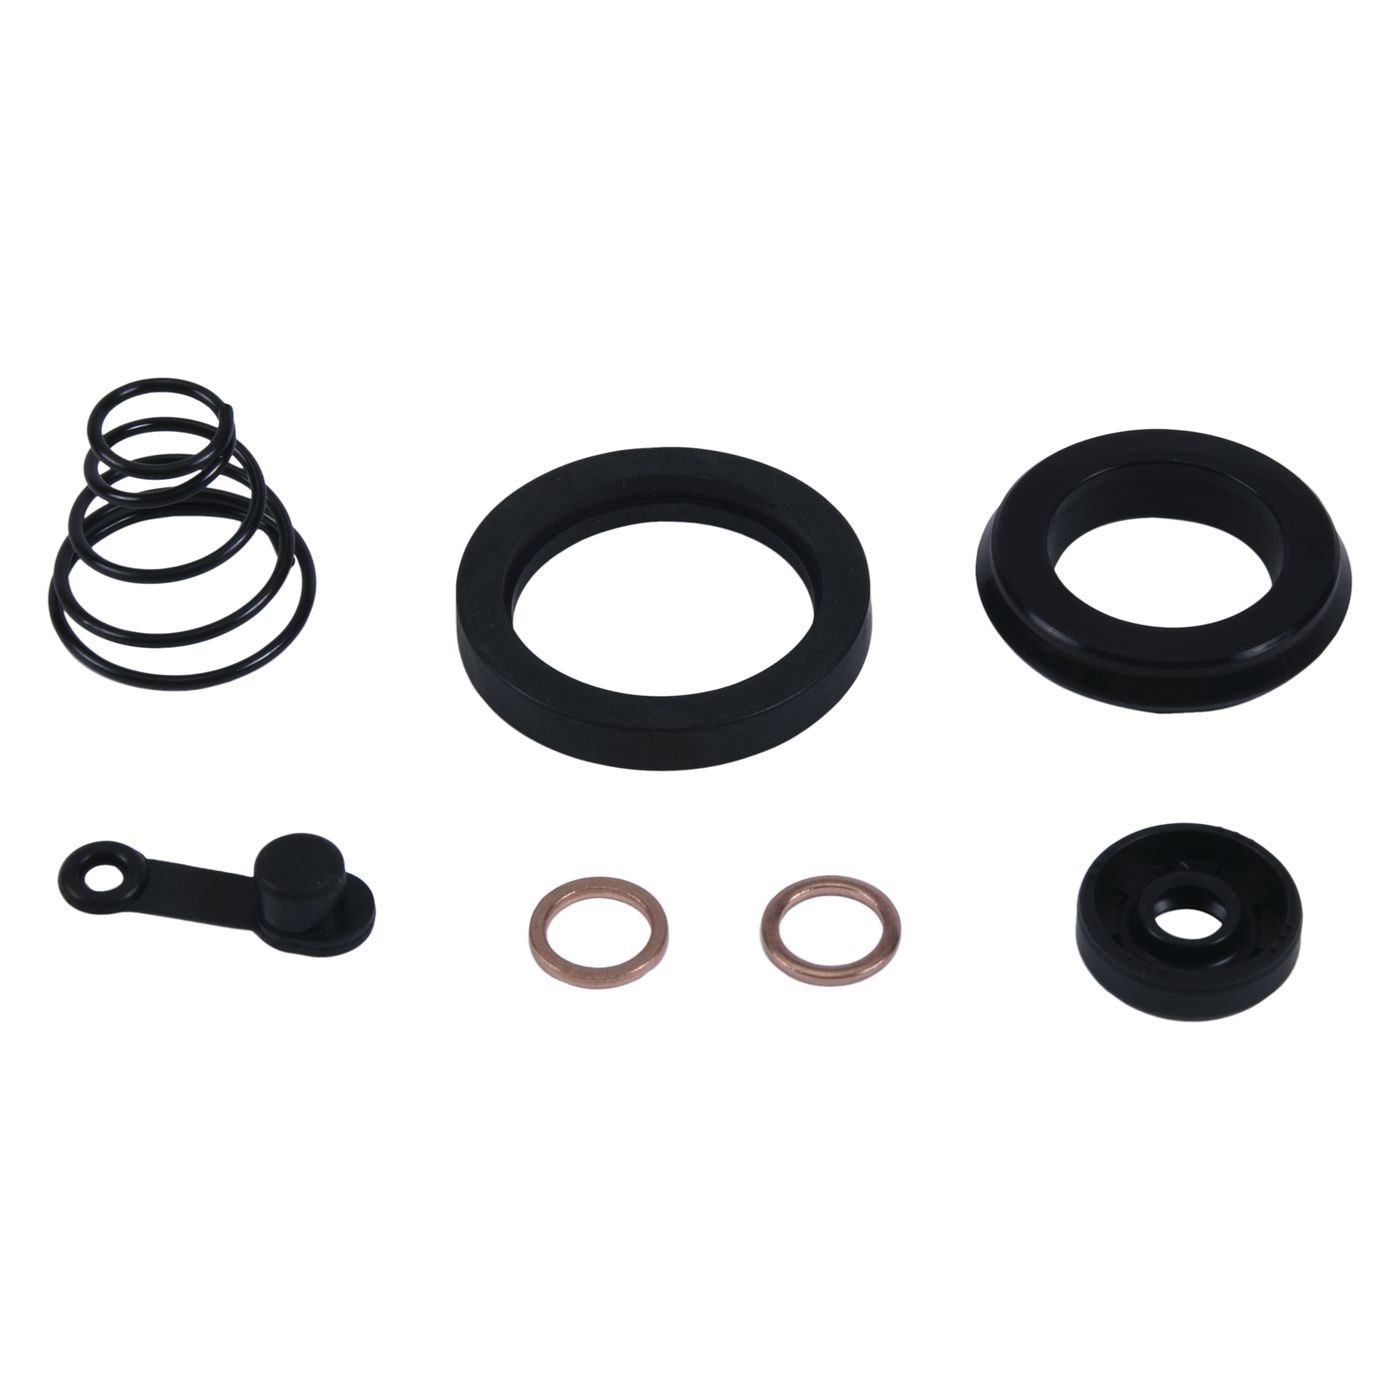 Wrp Clutch Slave Cylinder Kits - WRP186034 image